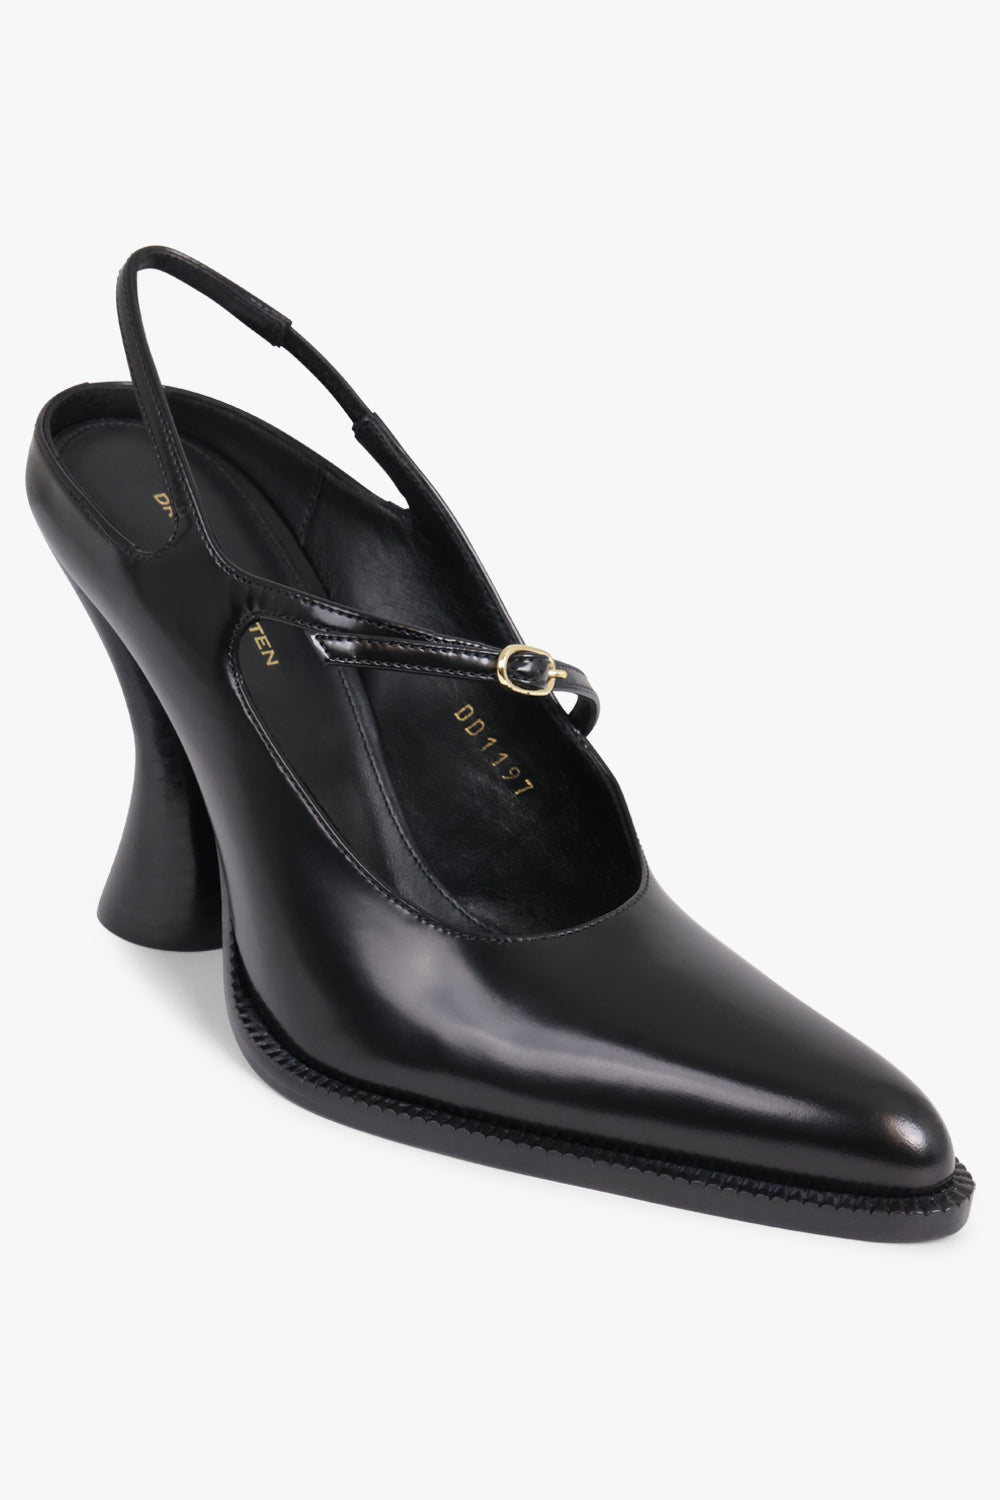 DRIES VAN NOTEN SHOES Shiny Pointed Toe Cruved 100Mm Pump | Black